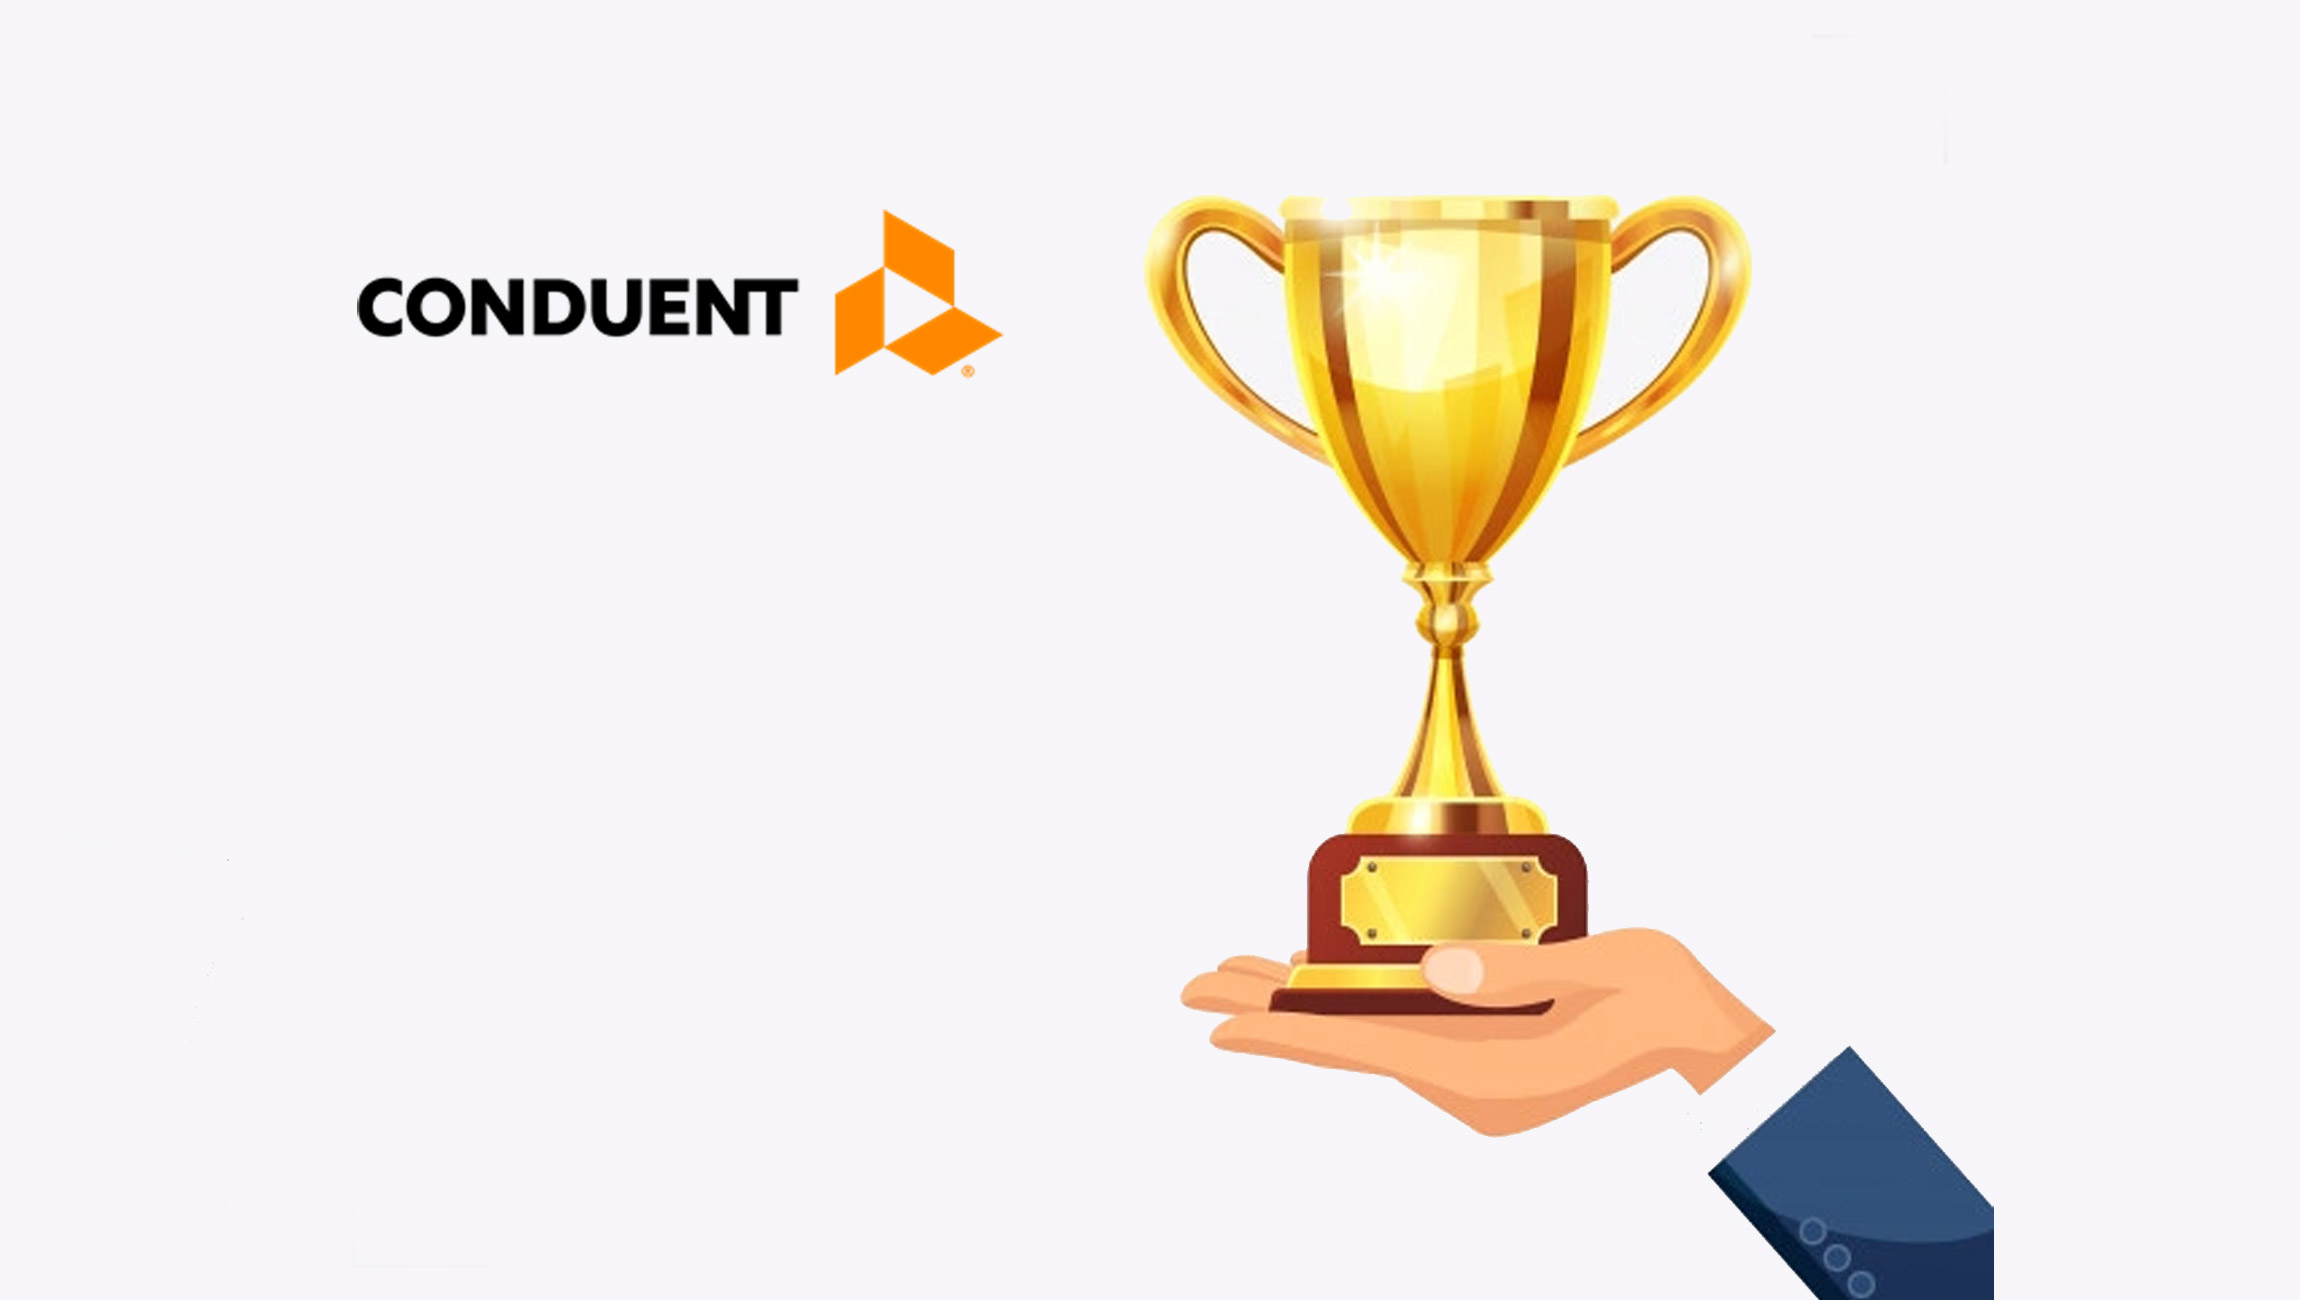 Conduent-and-its-CIO-Mark-Prout-Win-Gold-Stevie-Award-for-Leading-Through-Digital-Disruption